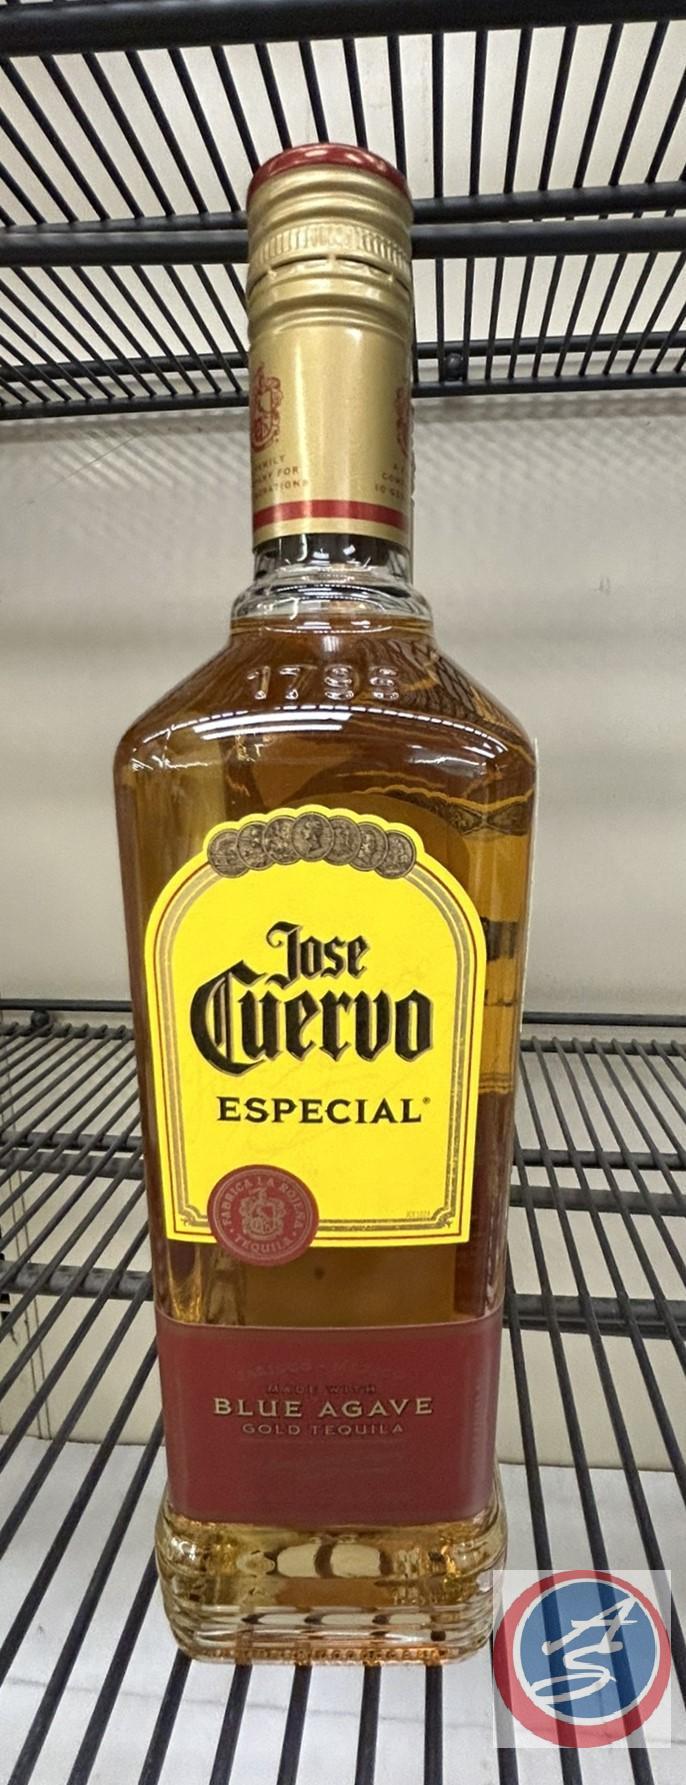 (3) Jose Cuervo Gold Tequila (times the money)